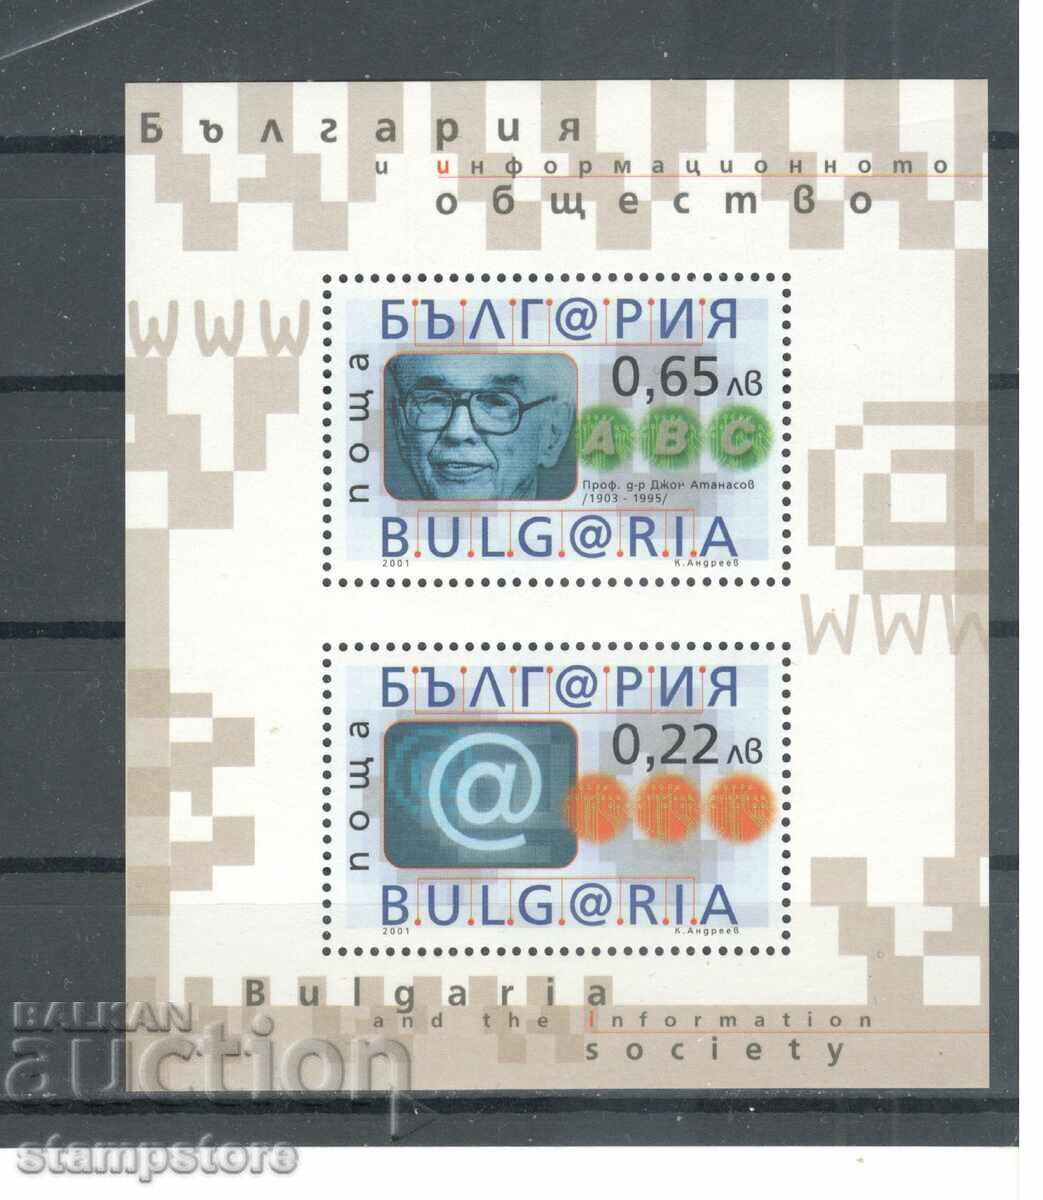 Bulgaria and the information society